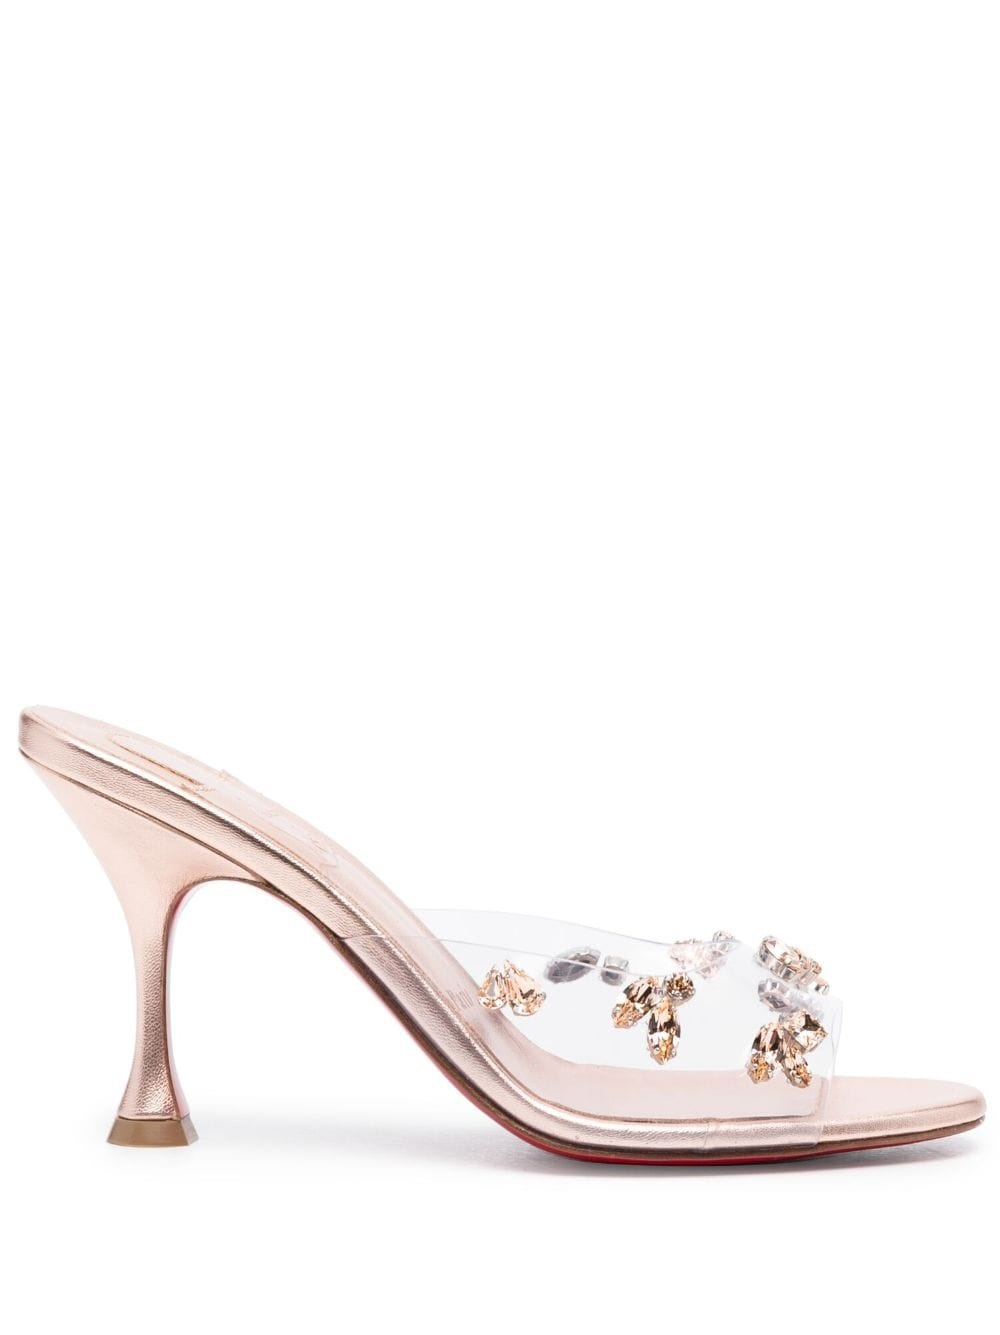 Degraqueen 85mm embellished mules - 1